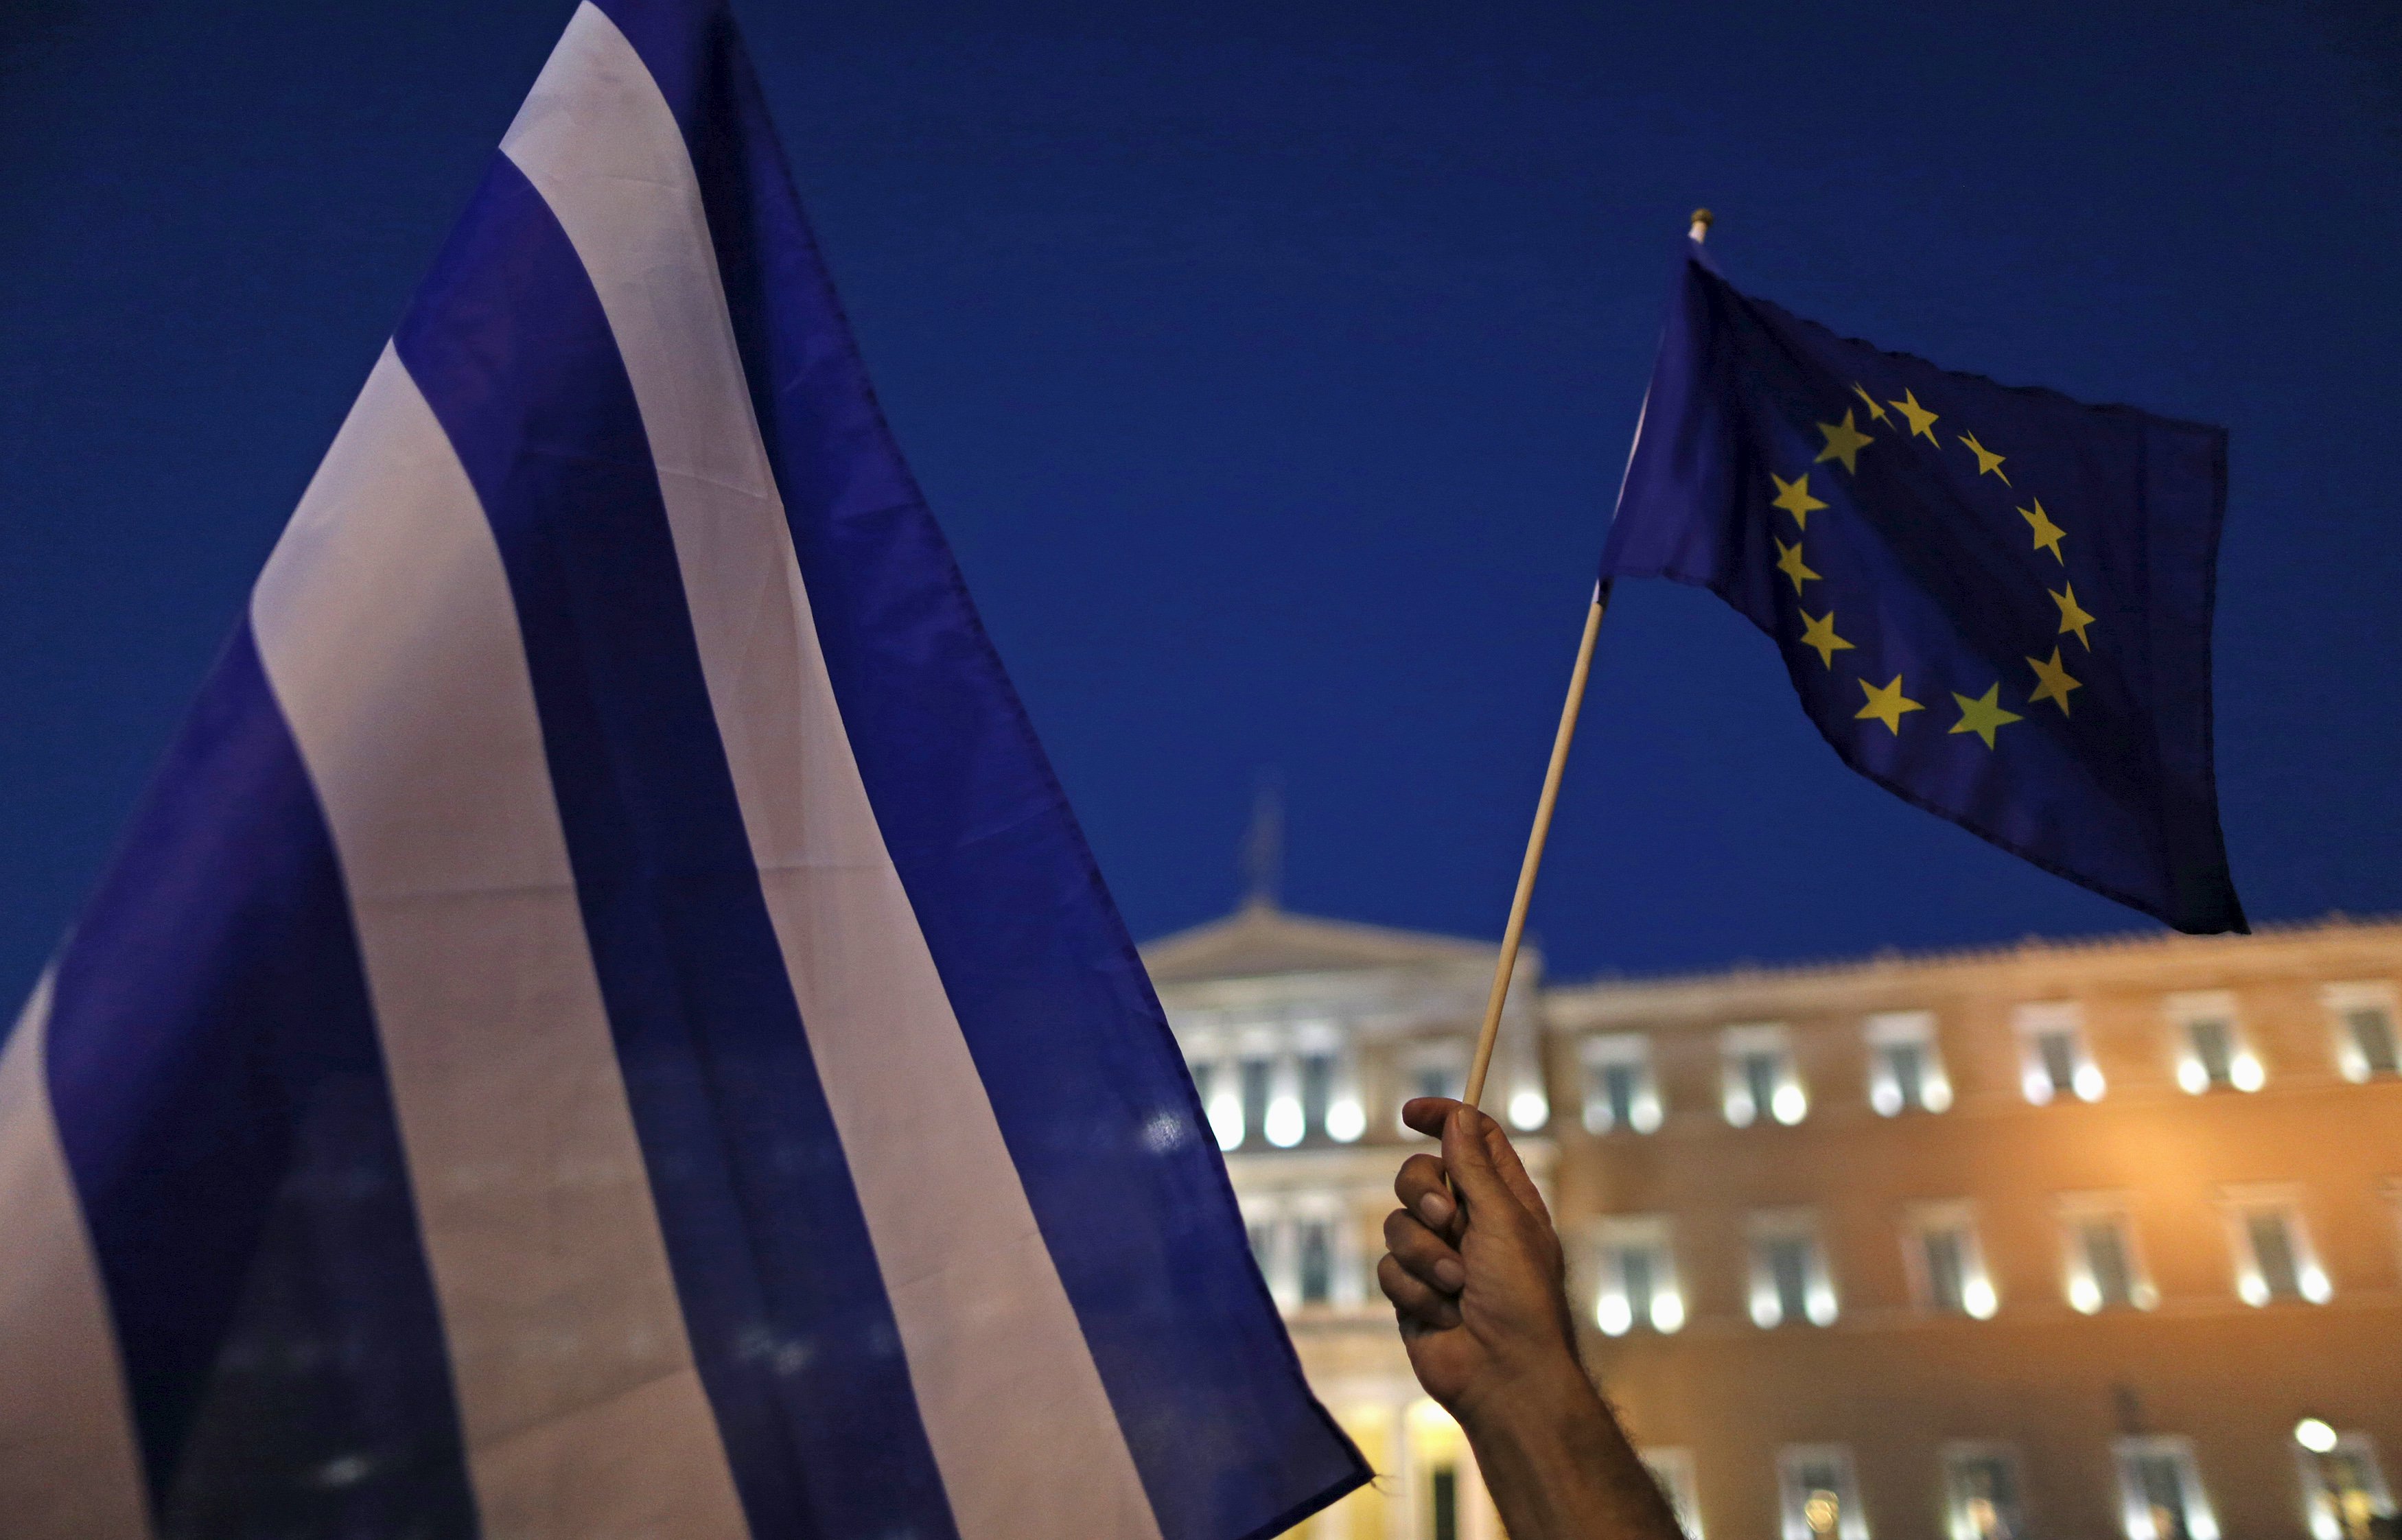 Without a new bailout deal, Greece could be forced out of the Eurozone.